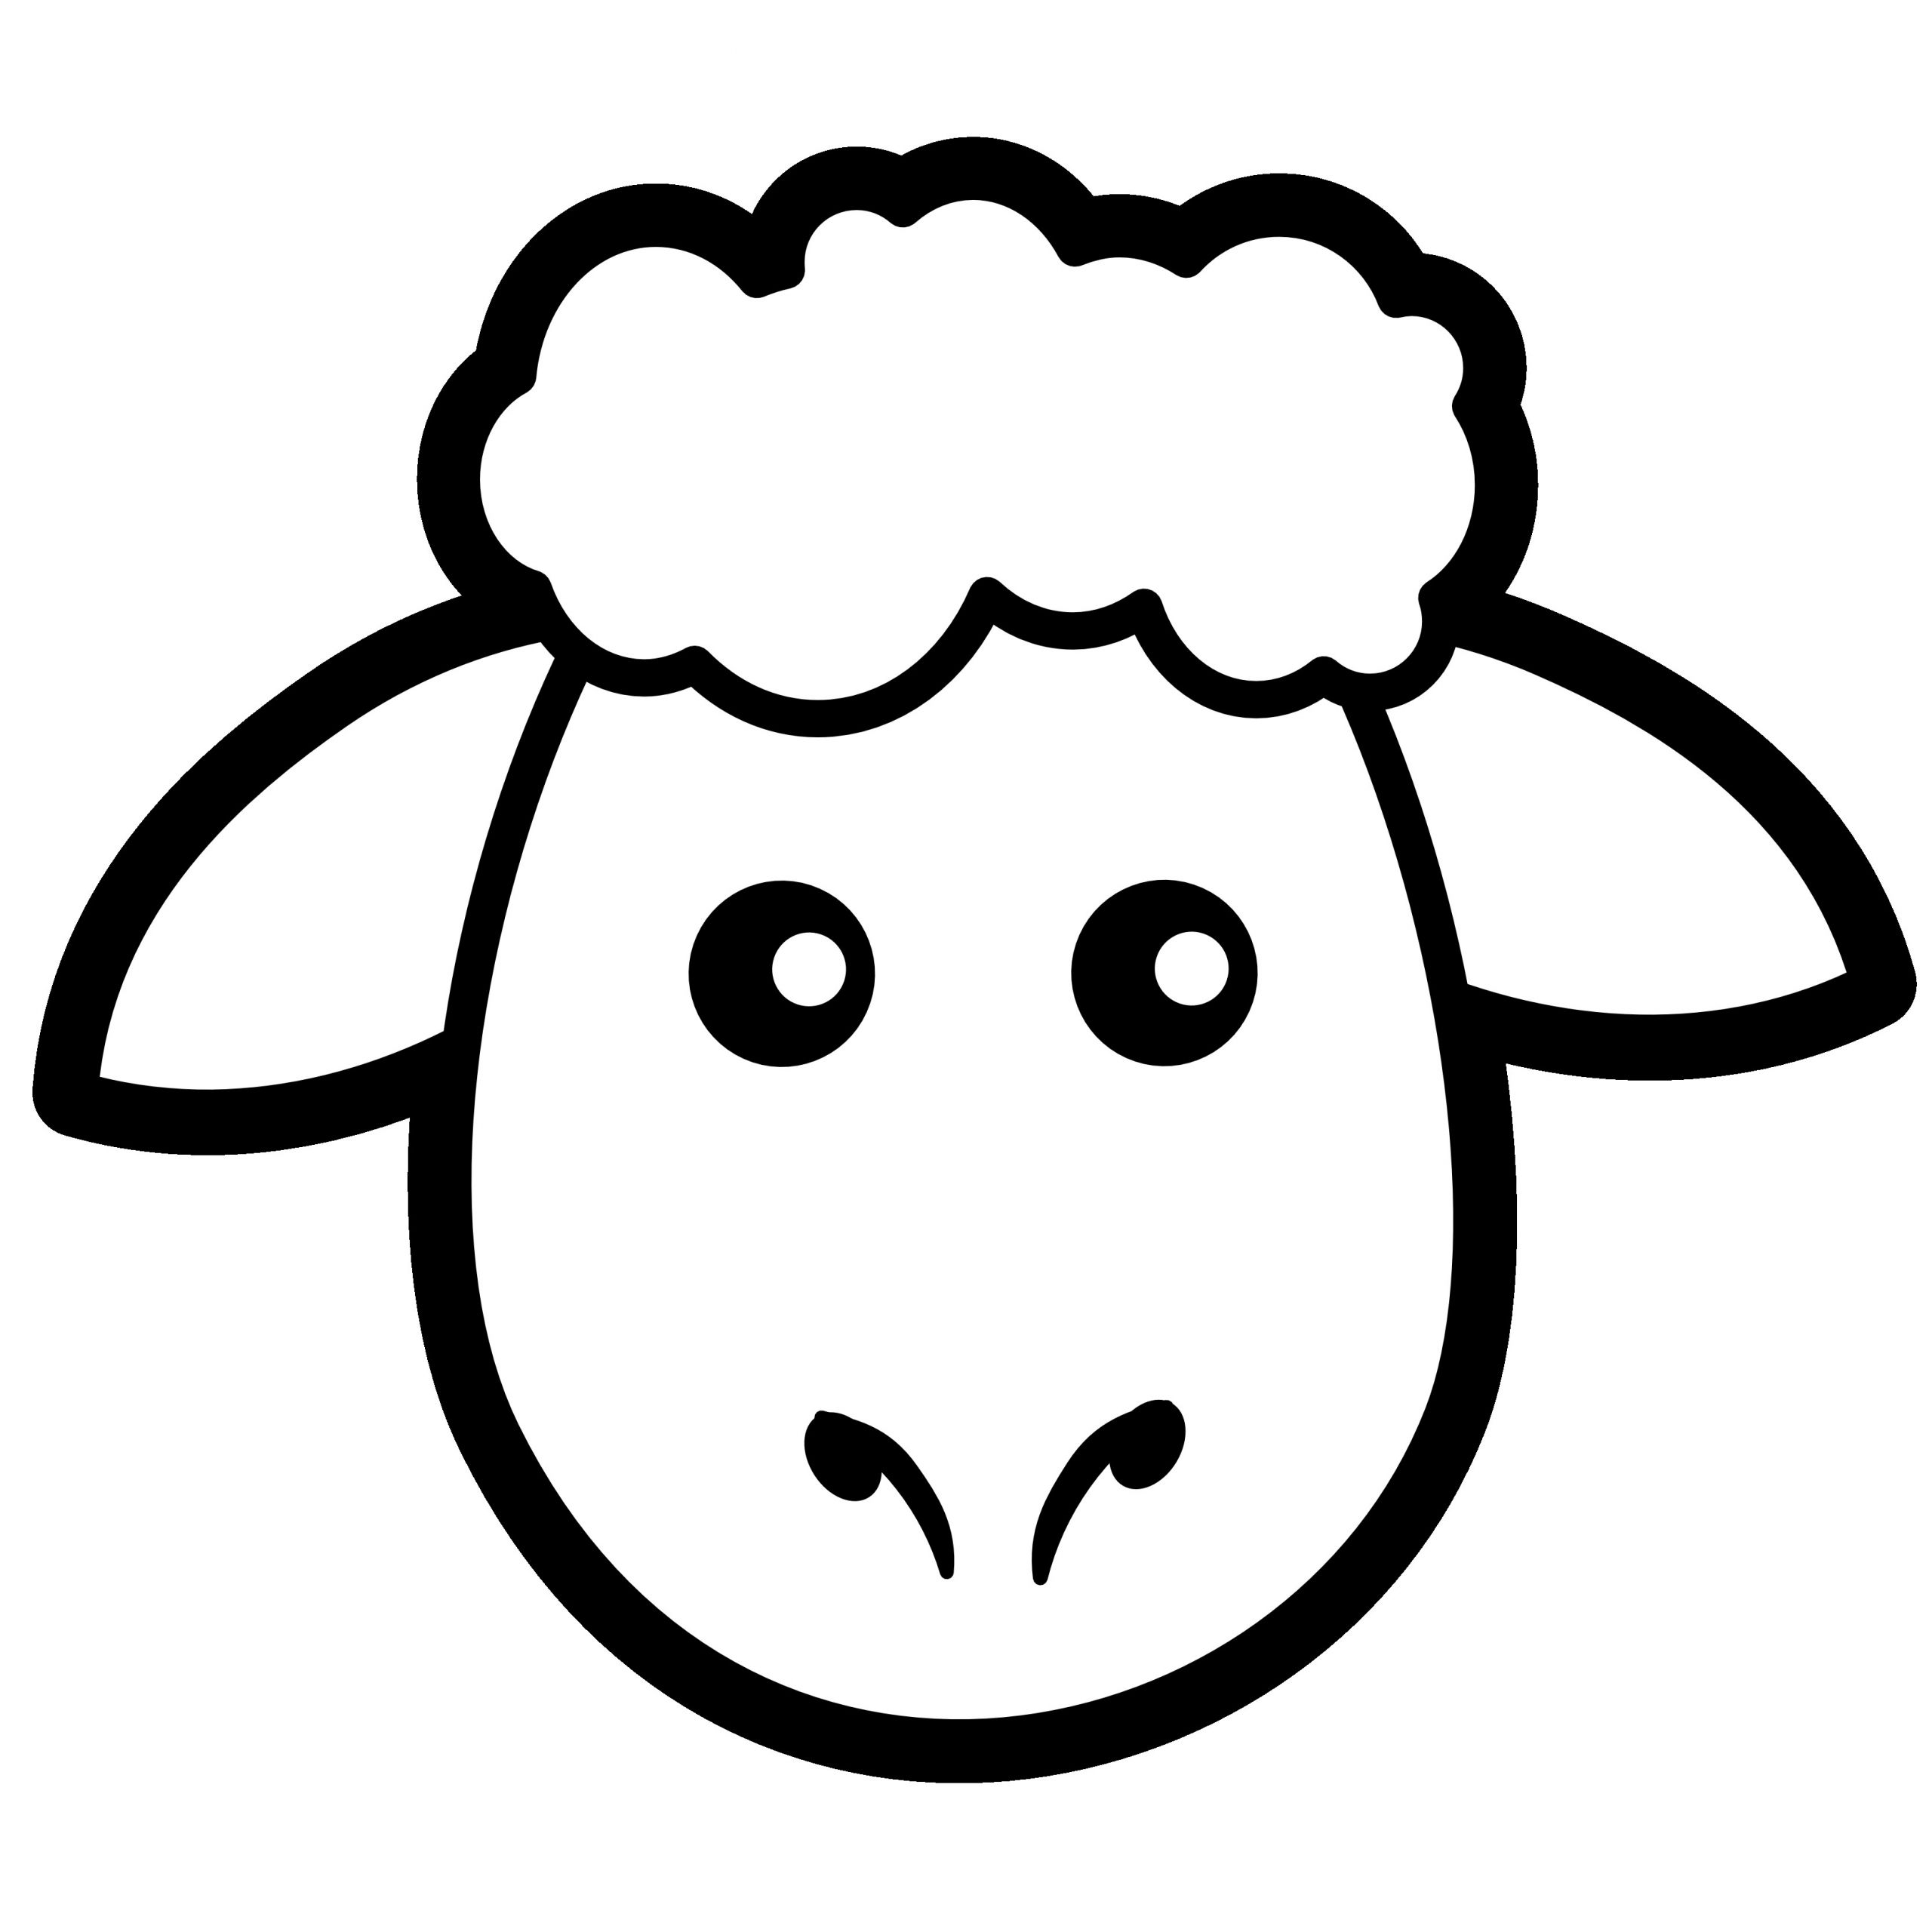 6dce c a c5ab sheep clipart black and white clipartix 3333 3333